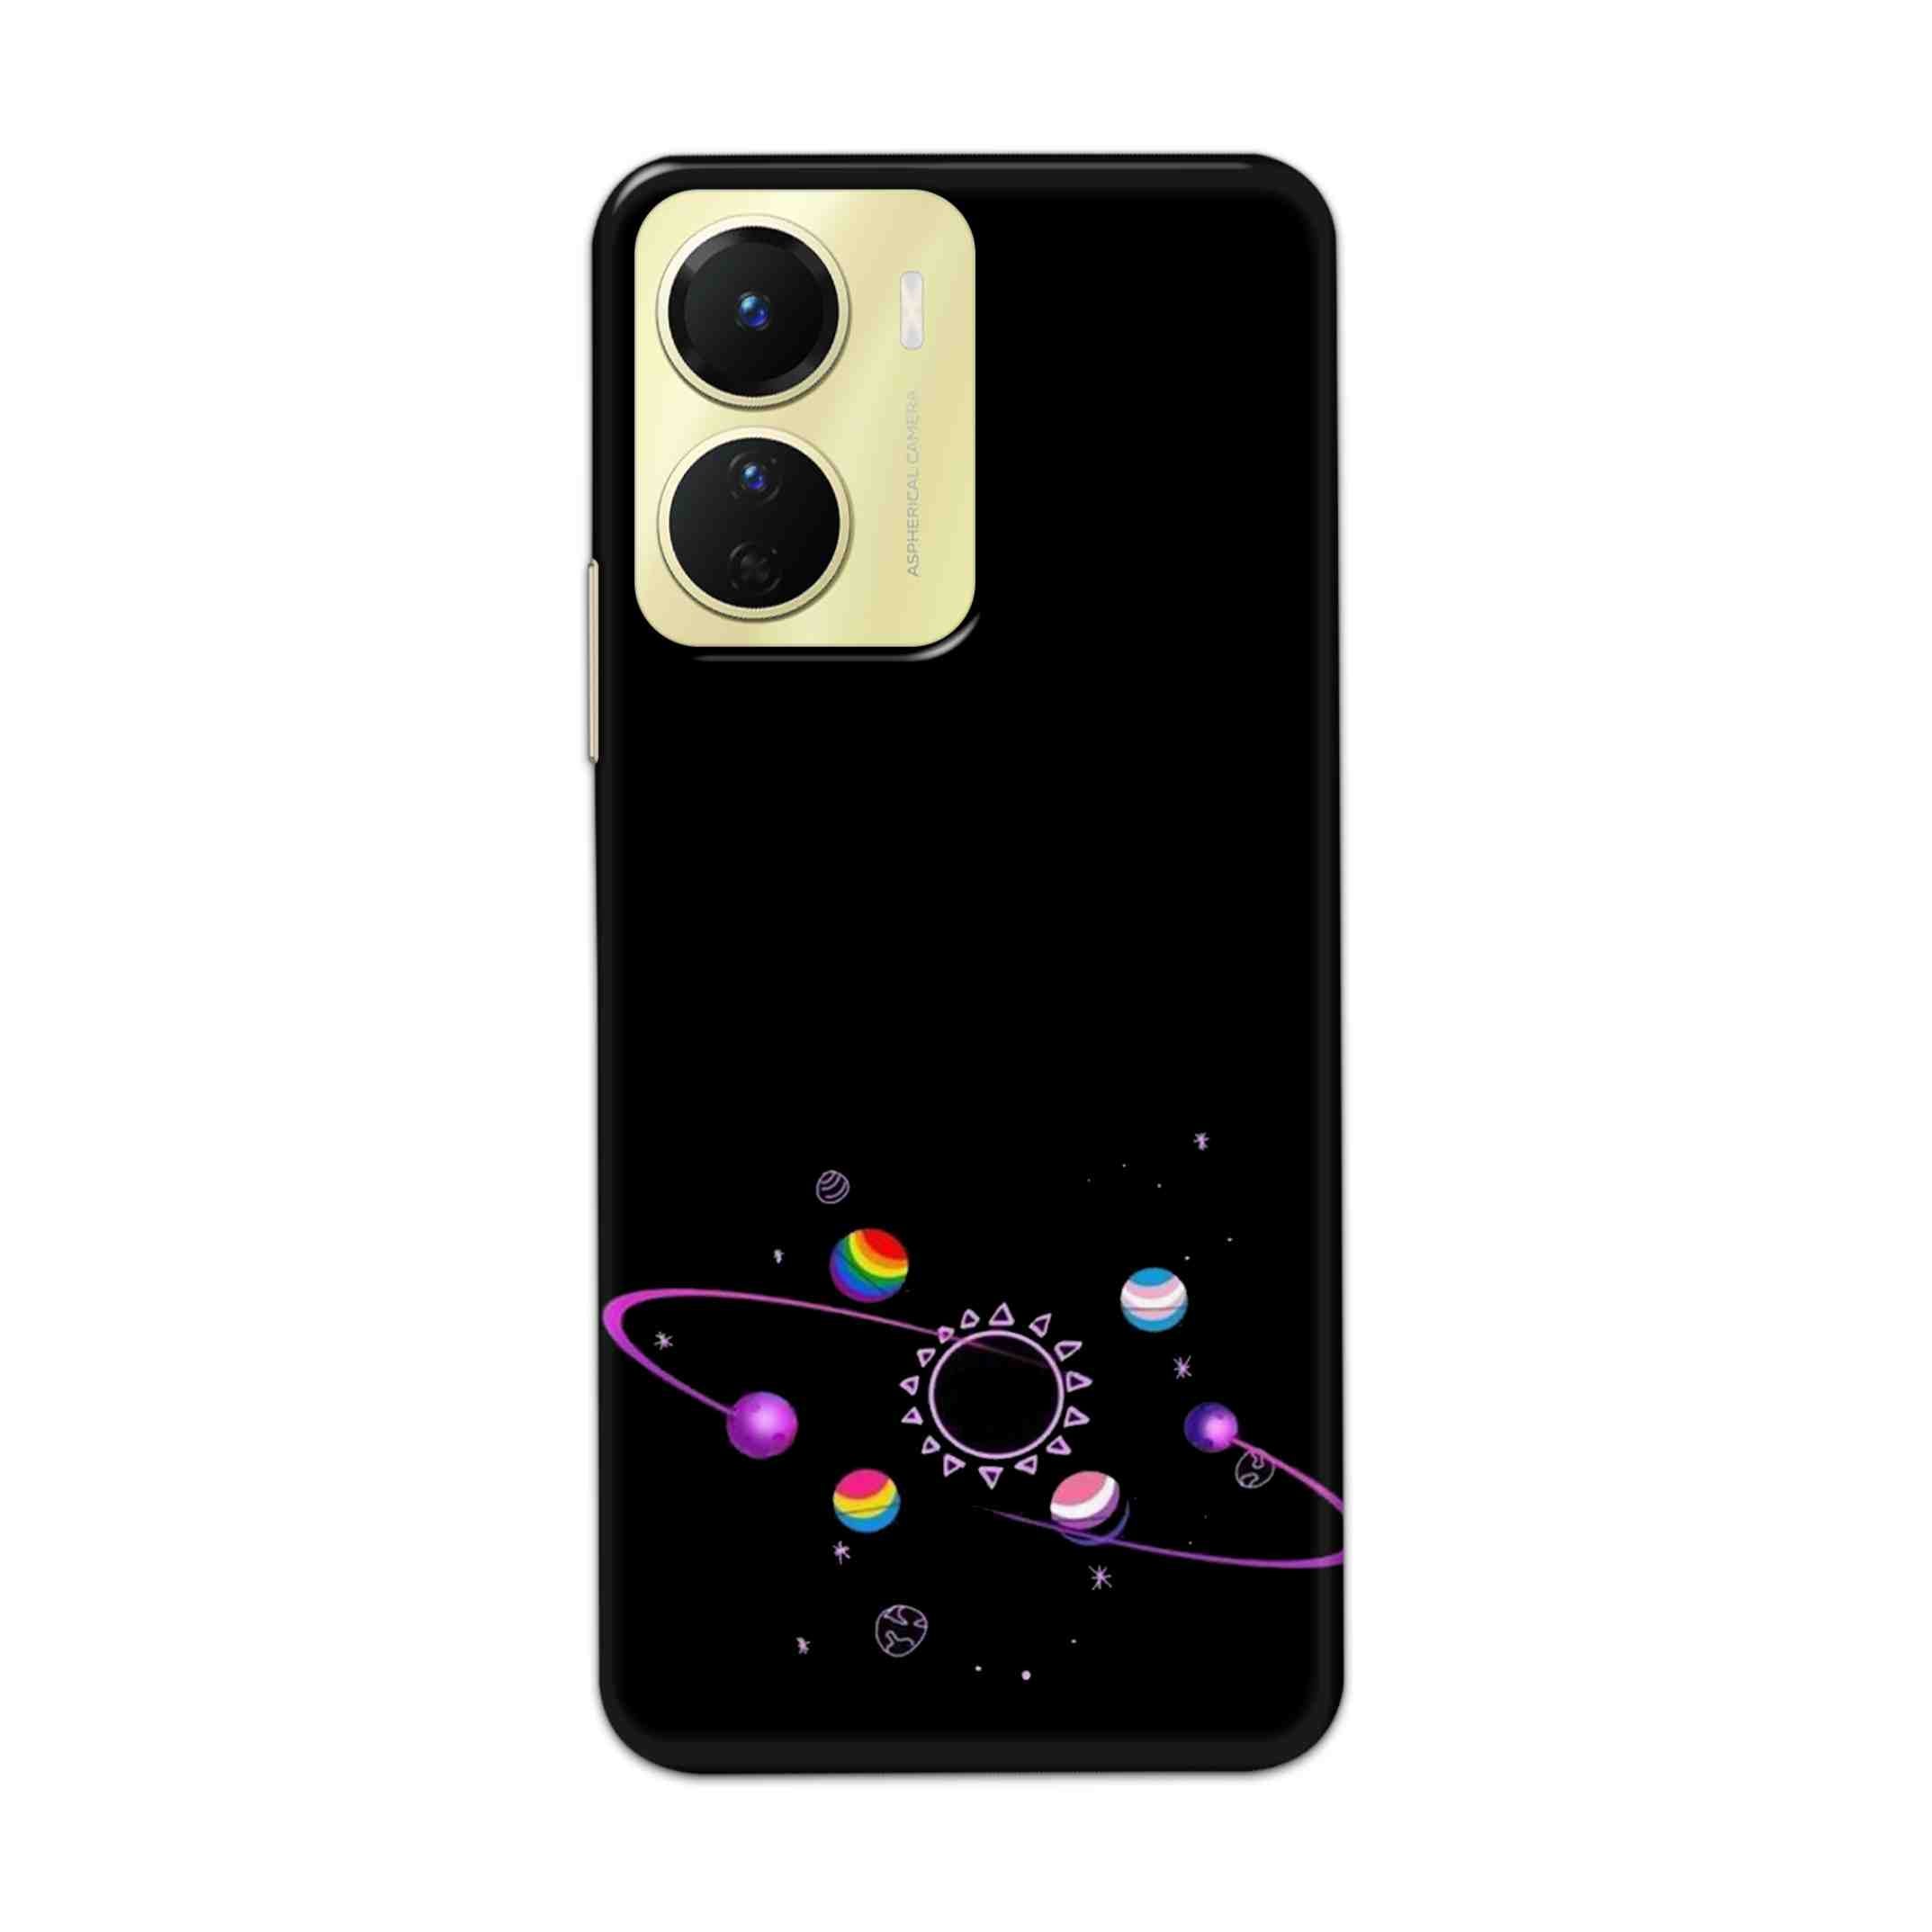 Buy Galaxy Hard Back Mobile Phone Case Cover For Vivo Y16 Online